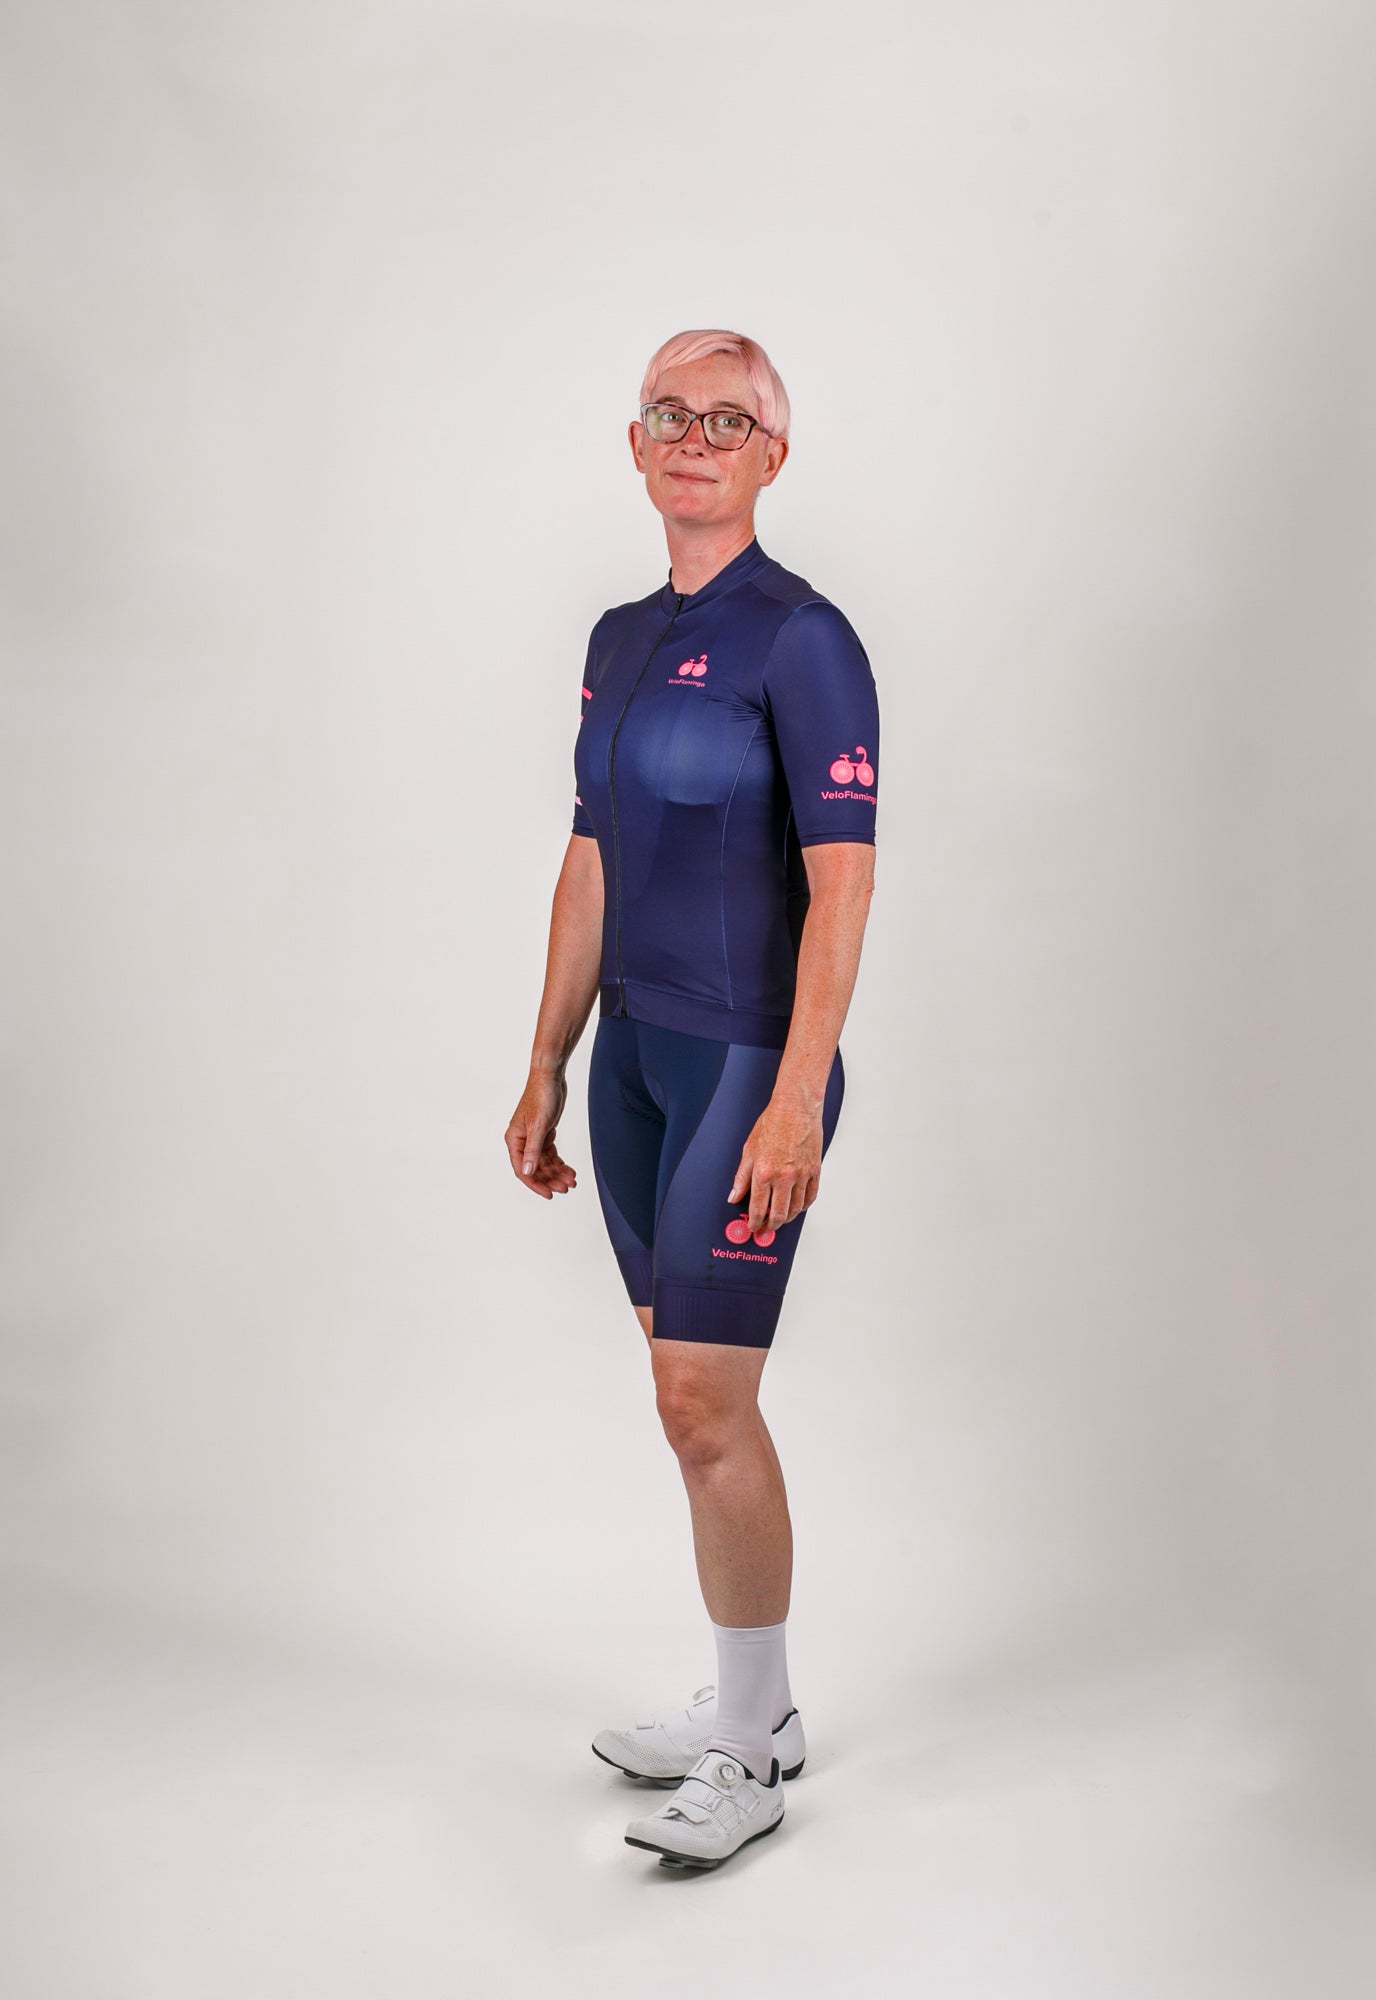 Indy Women's Cycling Jersey